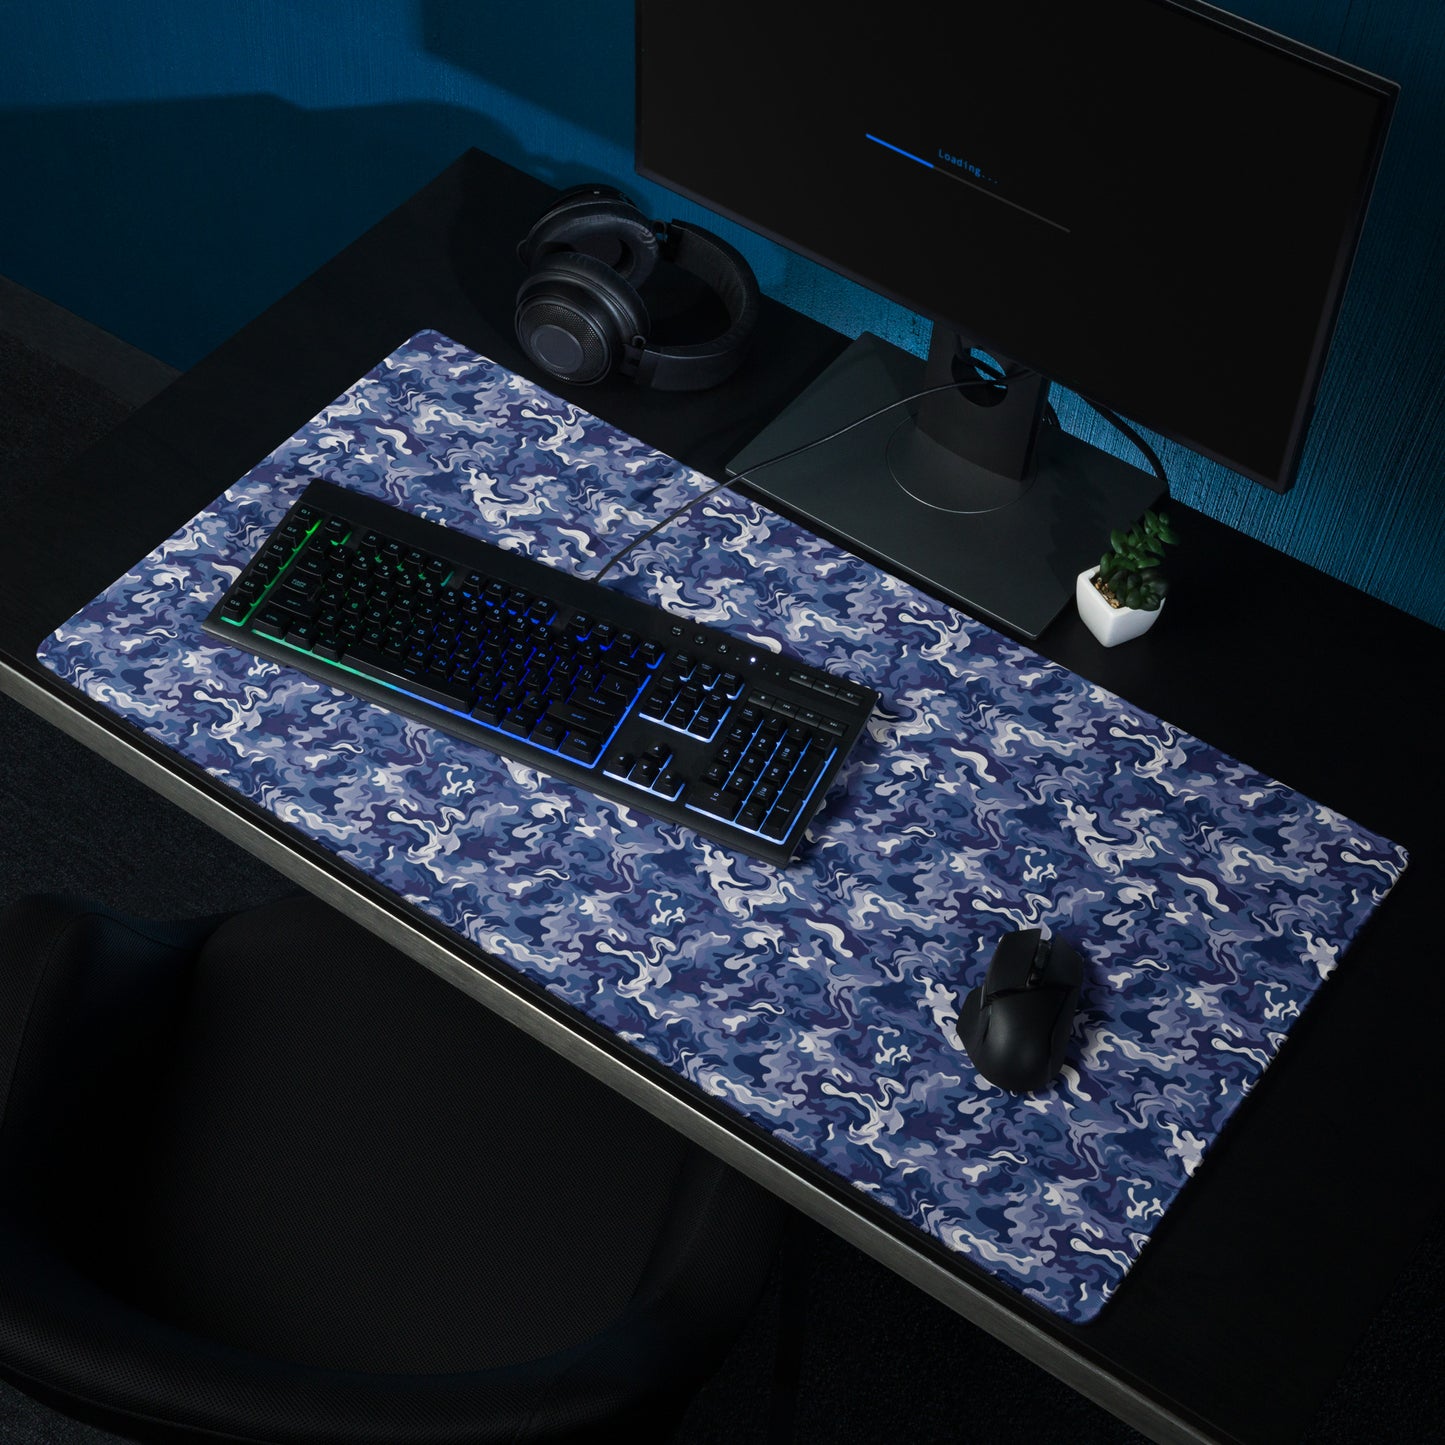 A 36" x 18" desk pad with a royal blue and white camo pattern sitting on a desk.